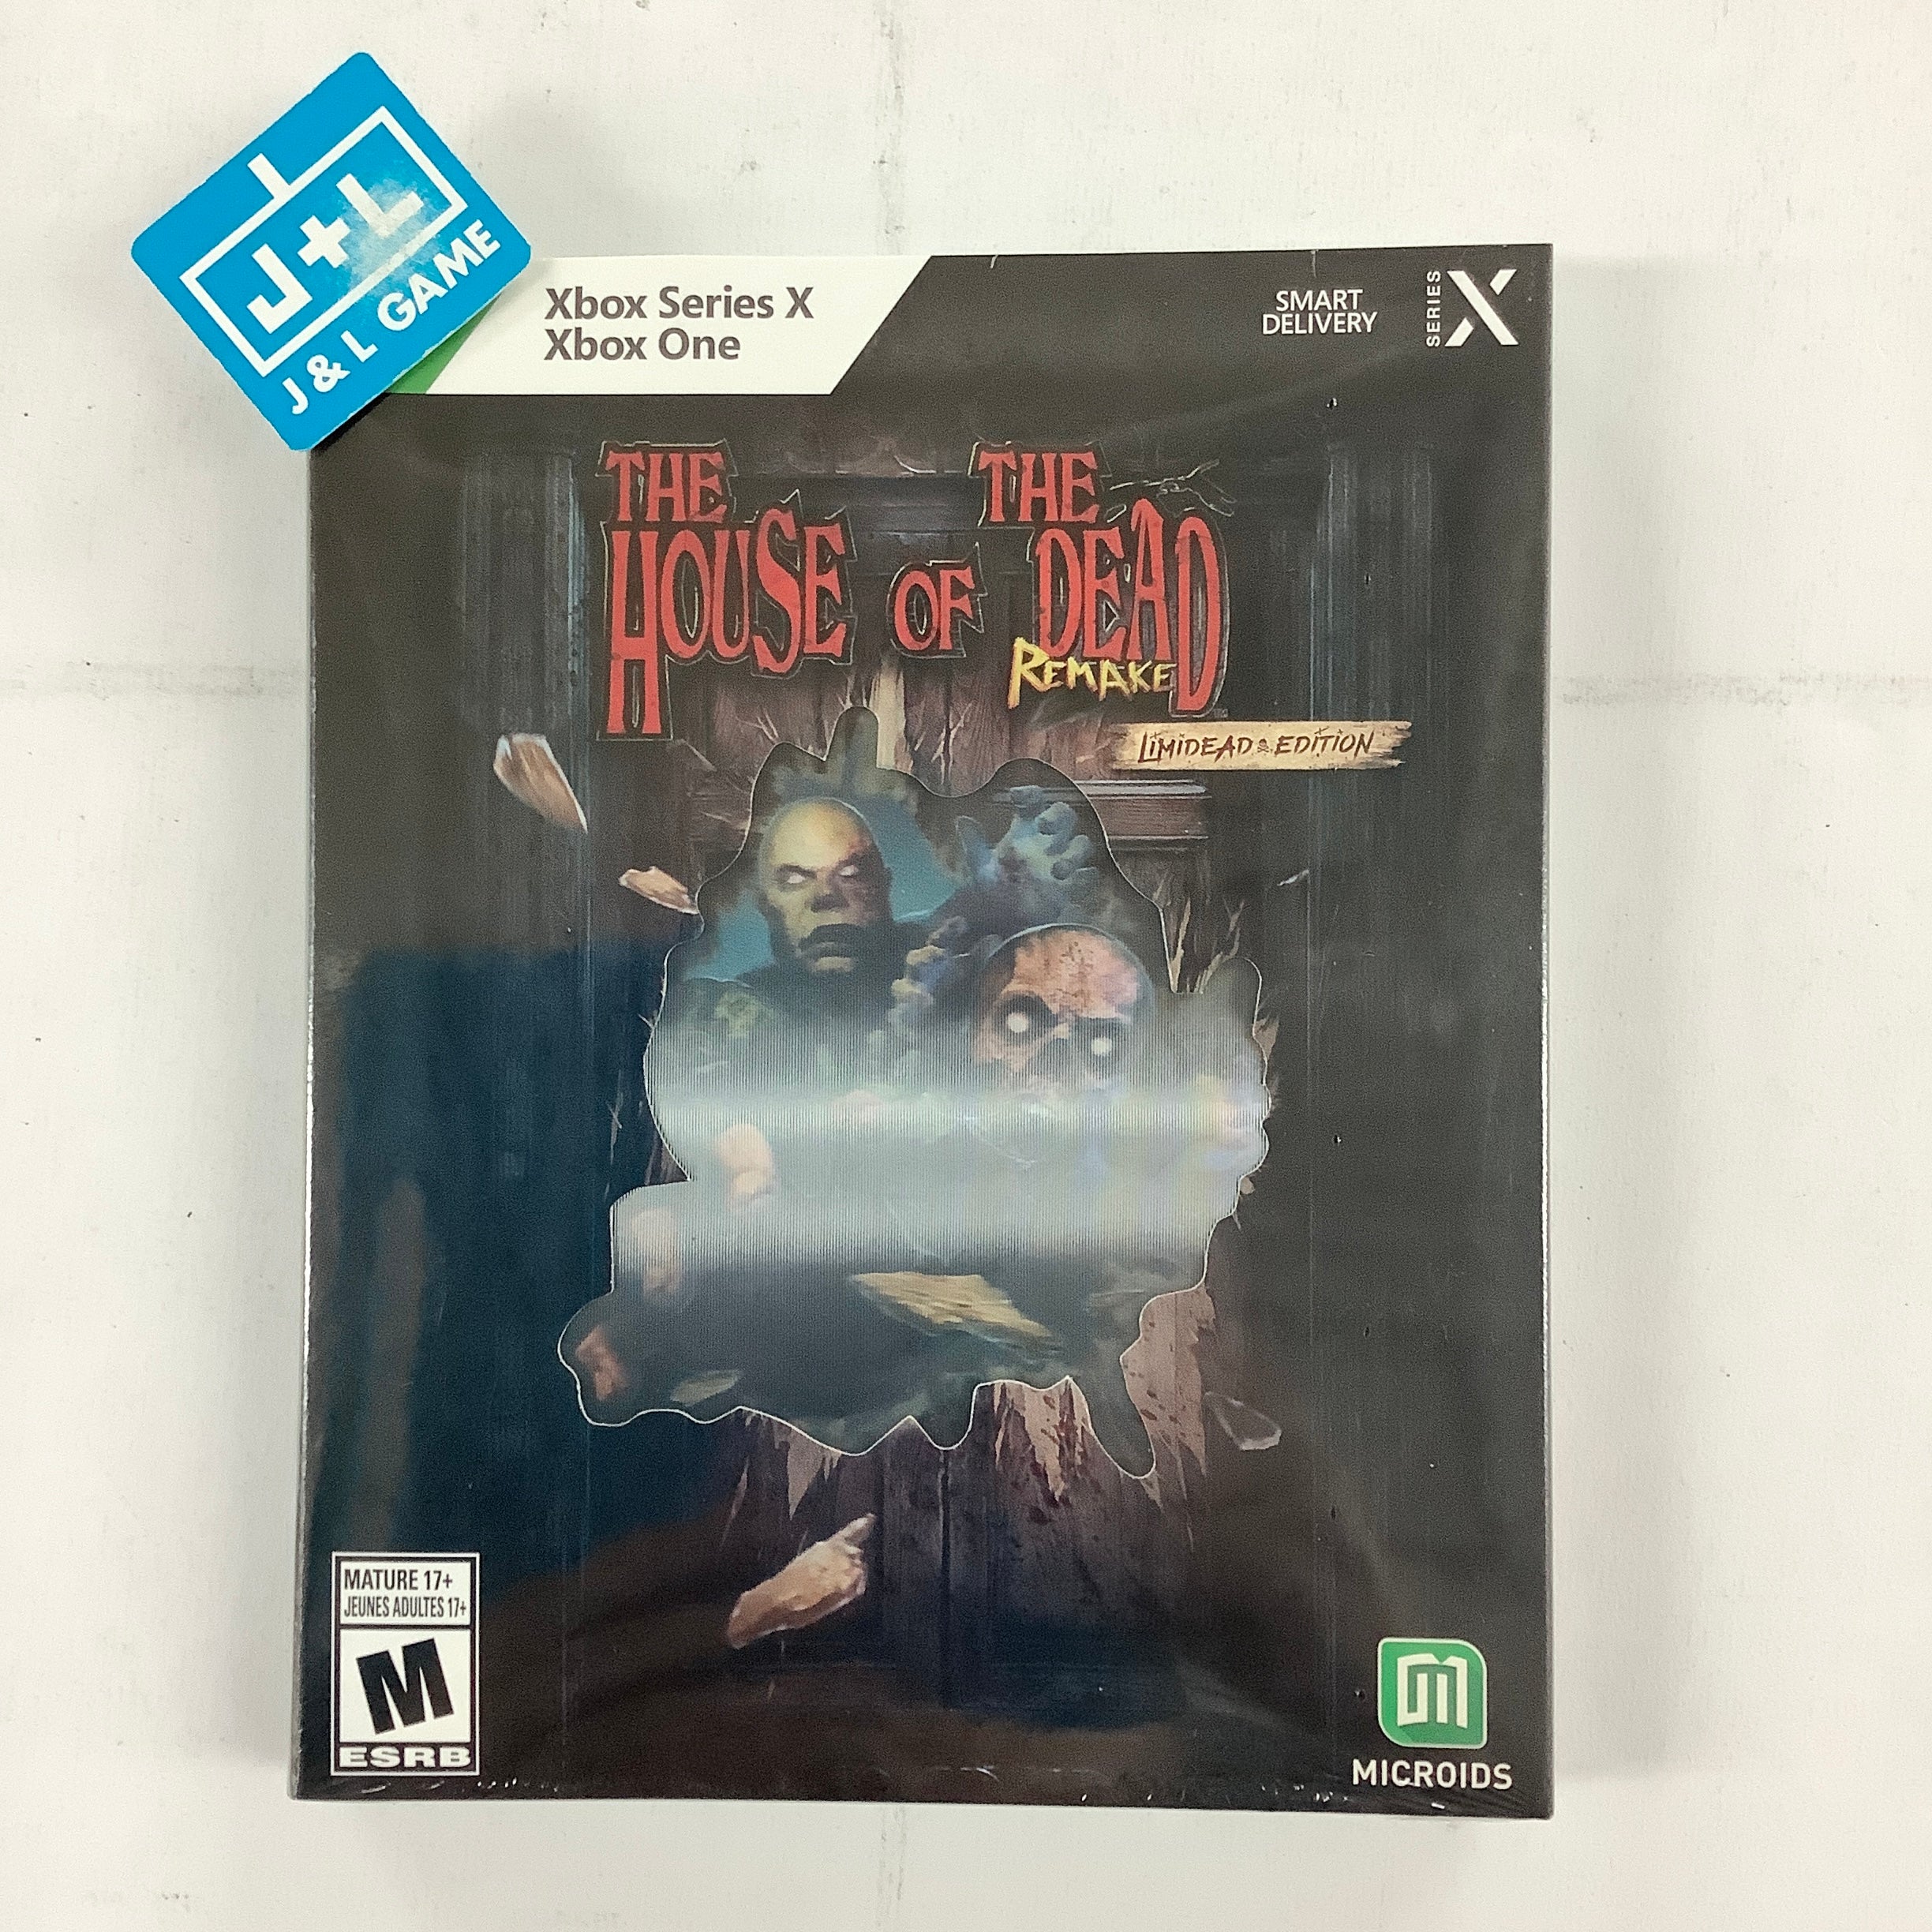 The House of the Dead: Remake (Limidead Edition) - (XSX) Xbox Series X Video Games Maximum Games   